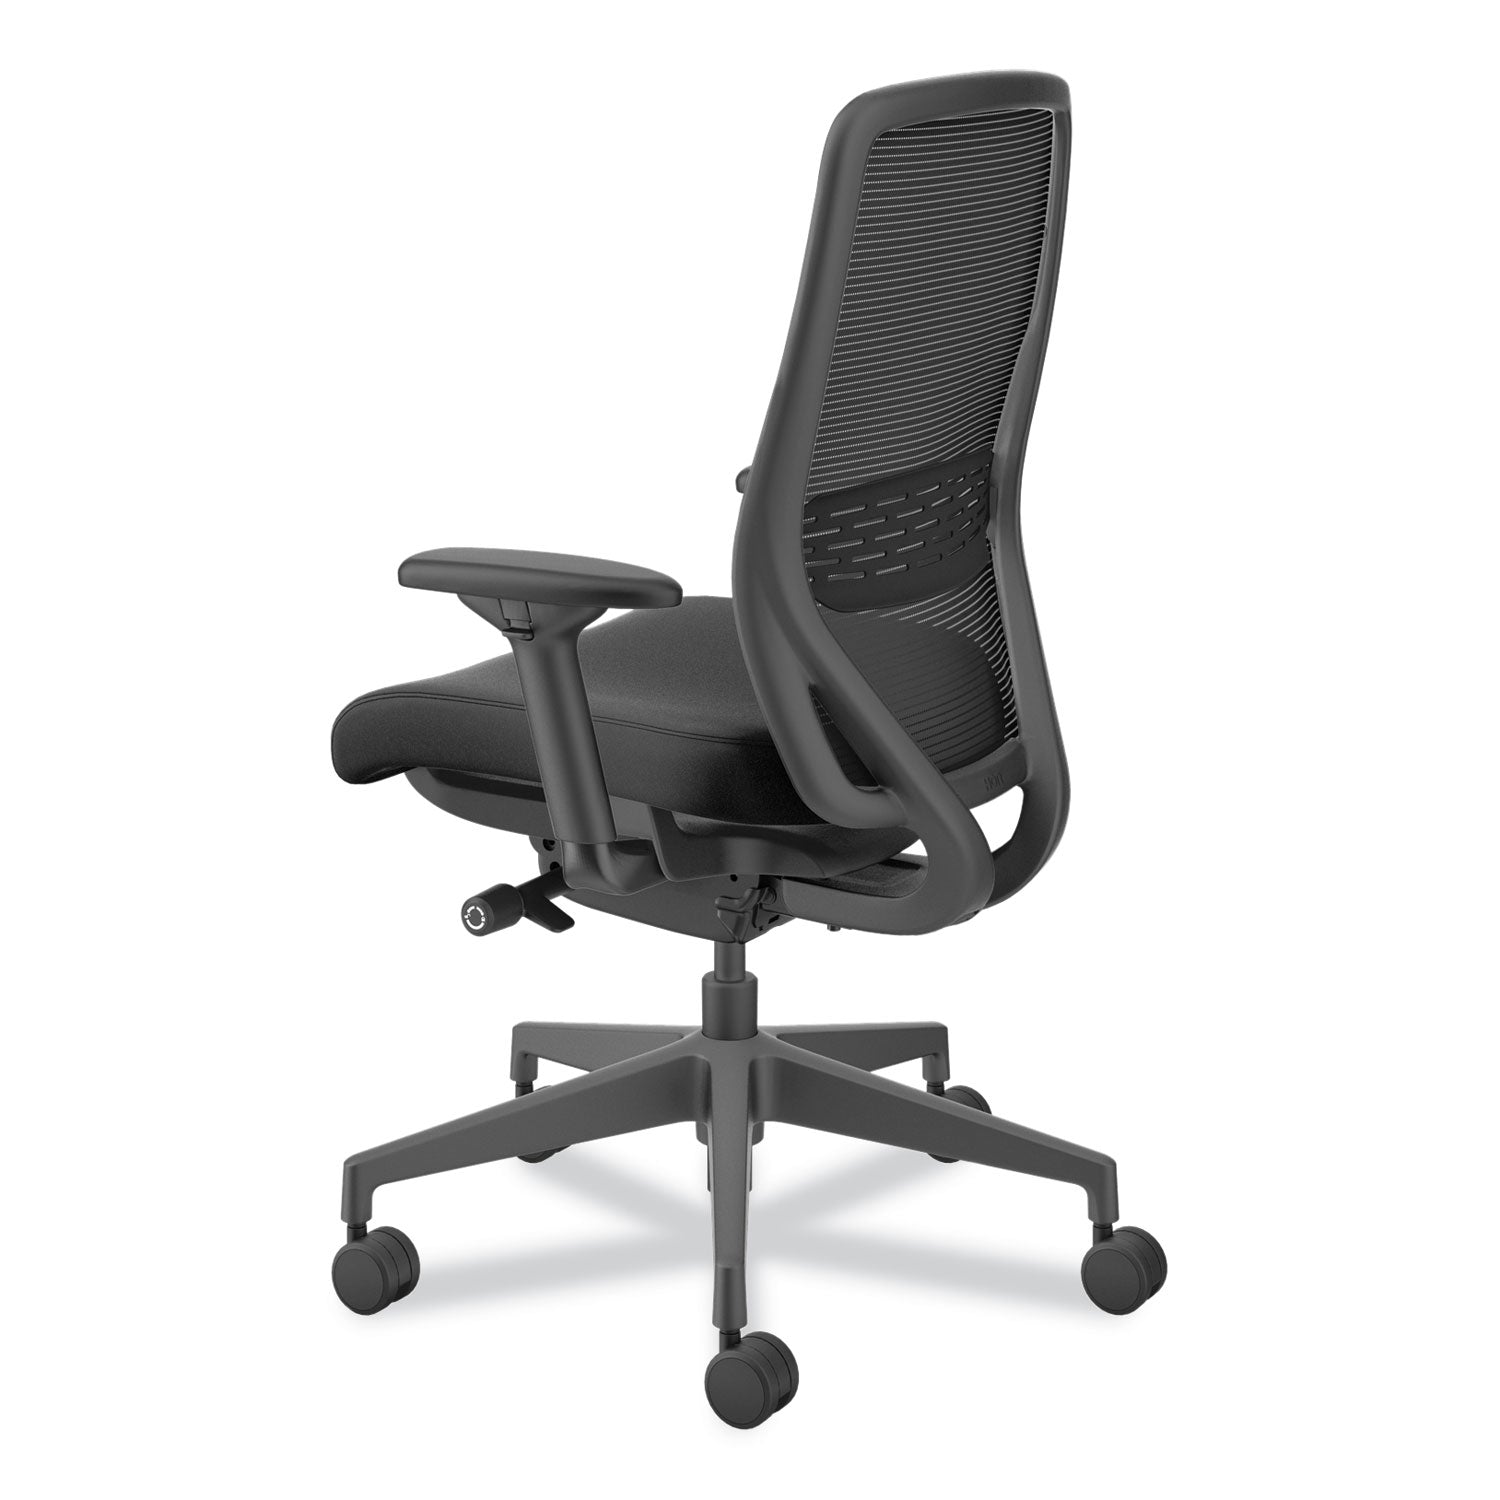 nucleus-series-recharge-task-chair-supports-up-to-300-lb-1663-to-2113-seat-height-black-seat-back-black-base_honnr12samc10bt - 6